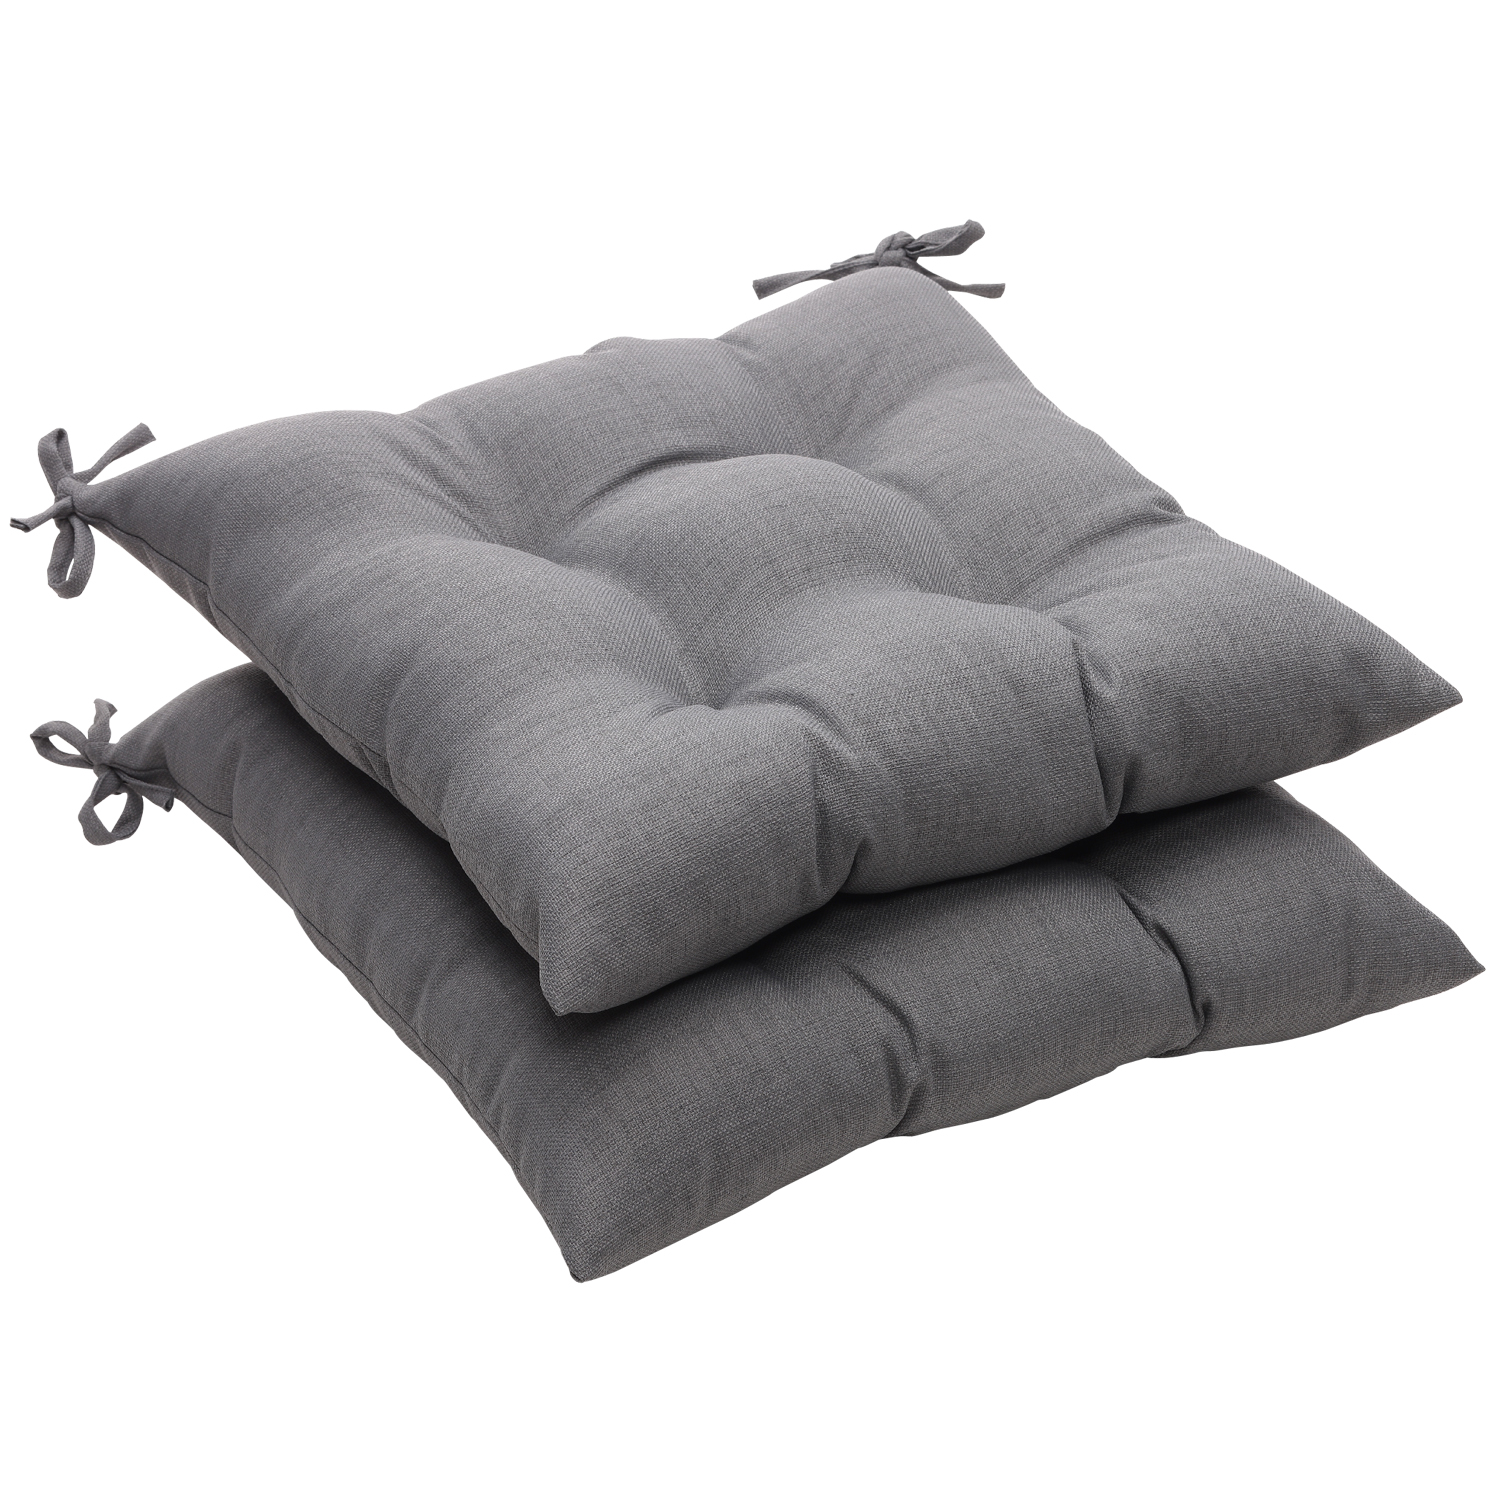 CC Outdoor Living Set of 2 Eco-Friendly Recycled Textured Gray Tufted Outdoor Seat Cushions 19"